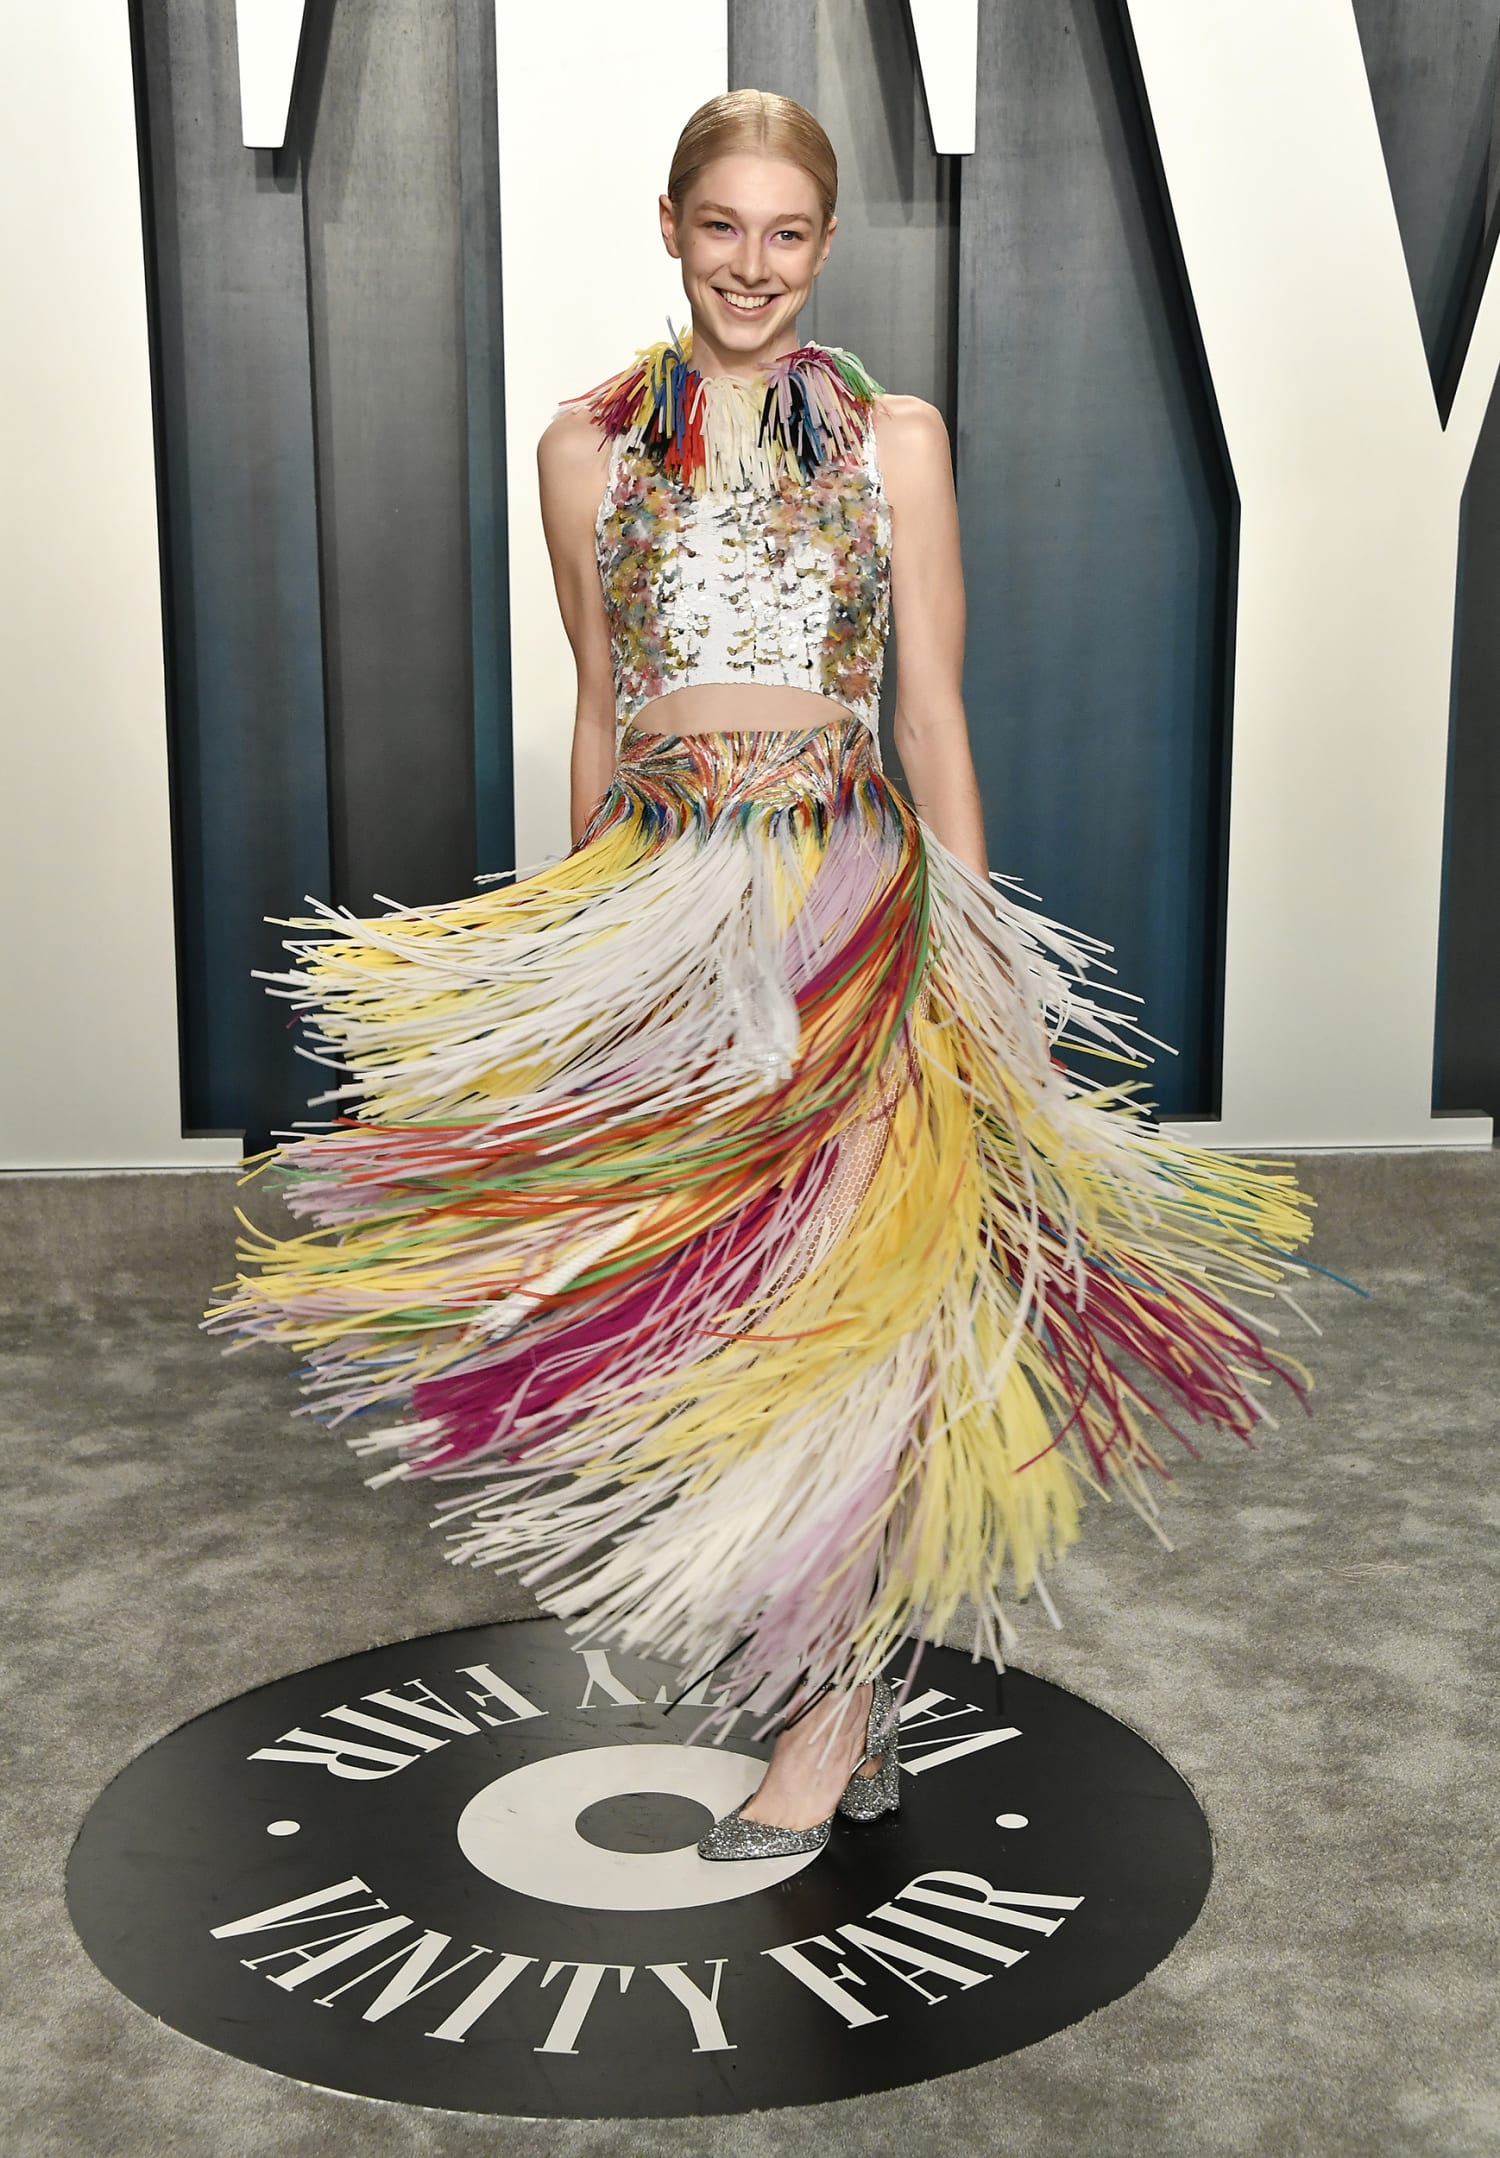 Hunter Schafer Wears Feather As a Bra at Vanity Fair Oscars Party 2023 With  Satin Skirt & Platform Sandals